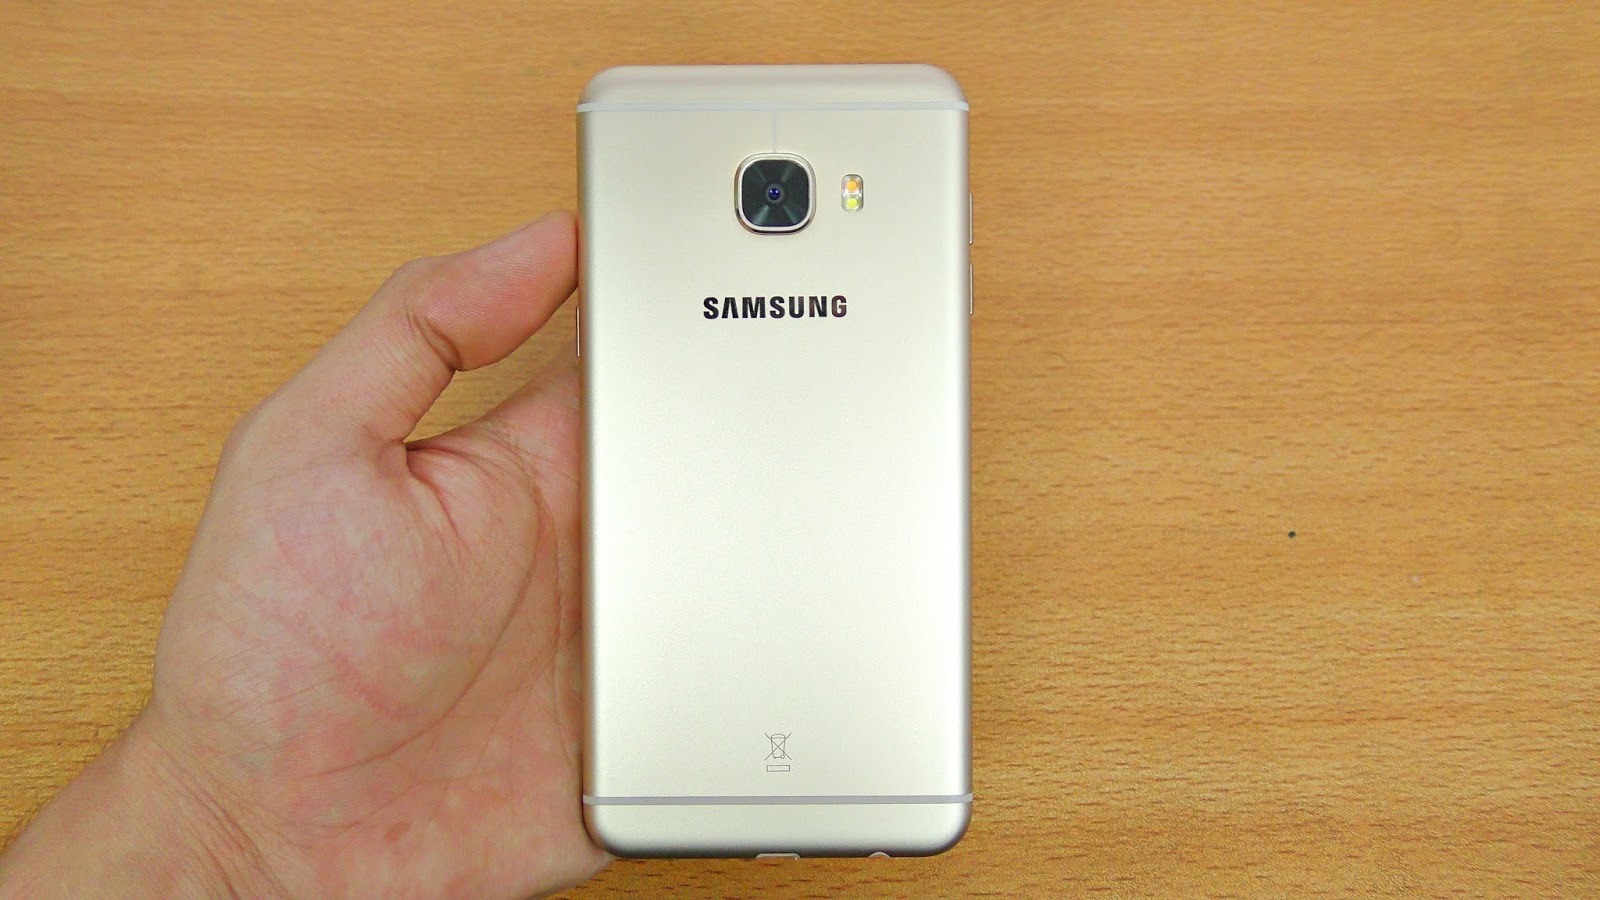 Samsung Galaxy C5 pictures, official photos